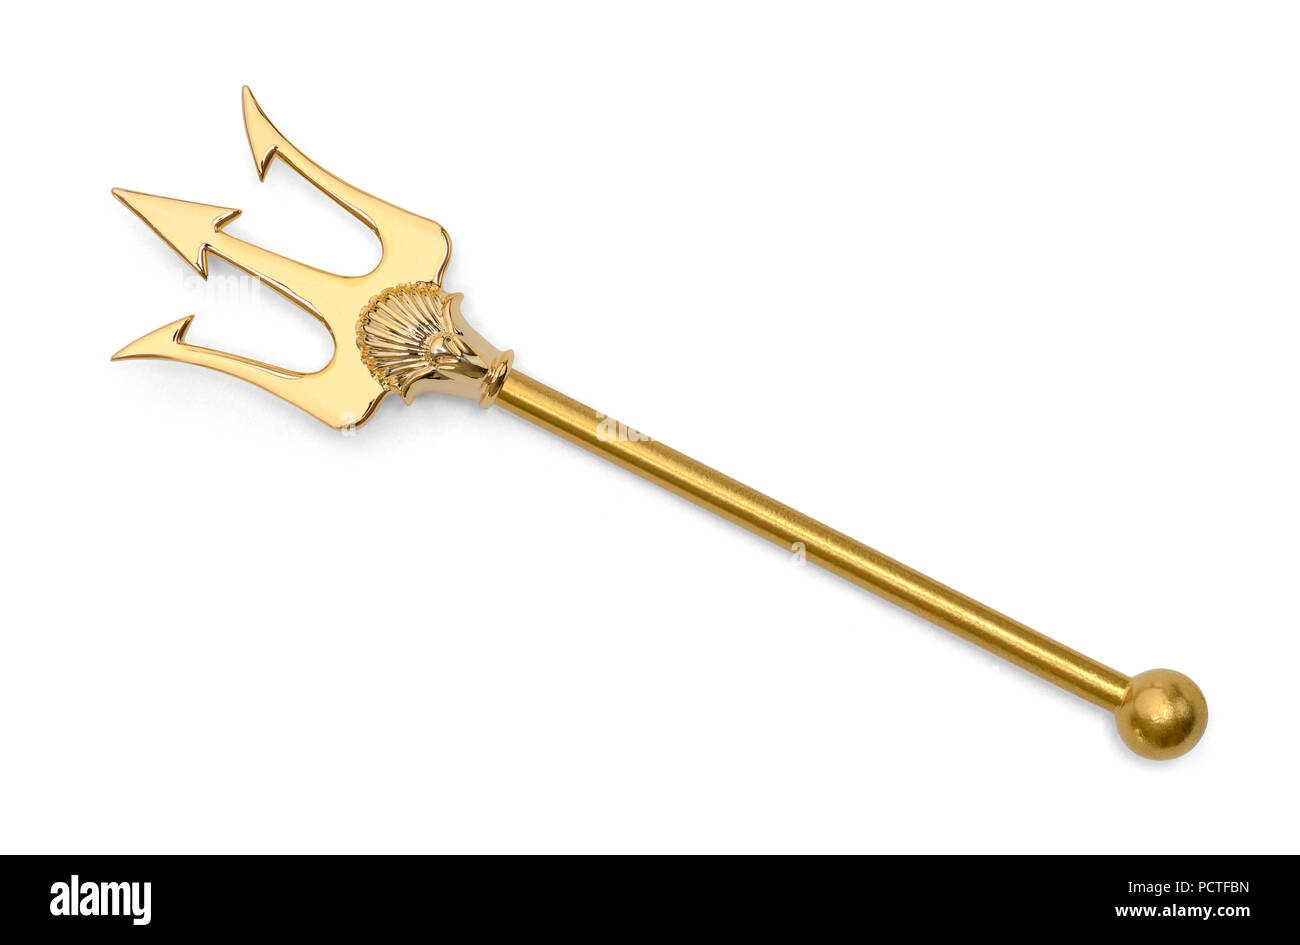 Gold Pointed Trident Isolated on a White Background. Stock Photo